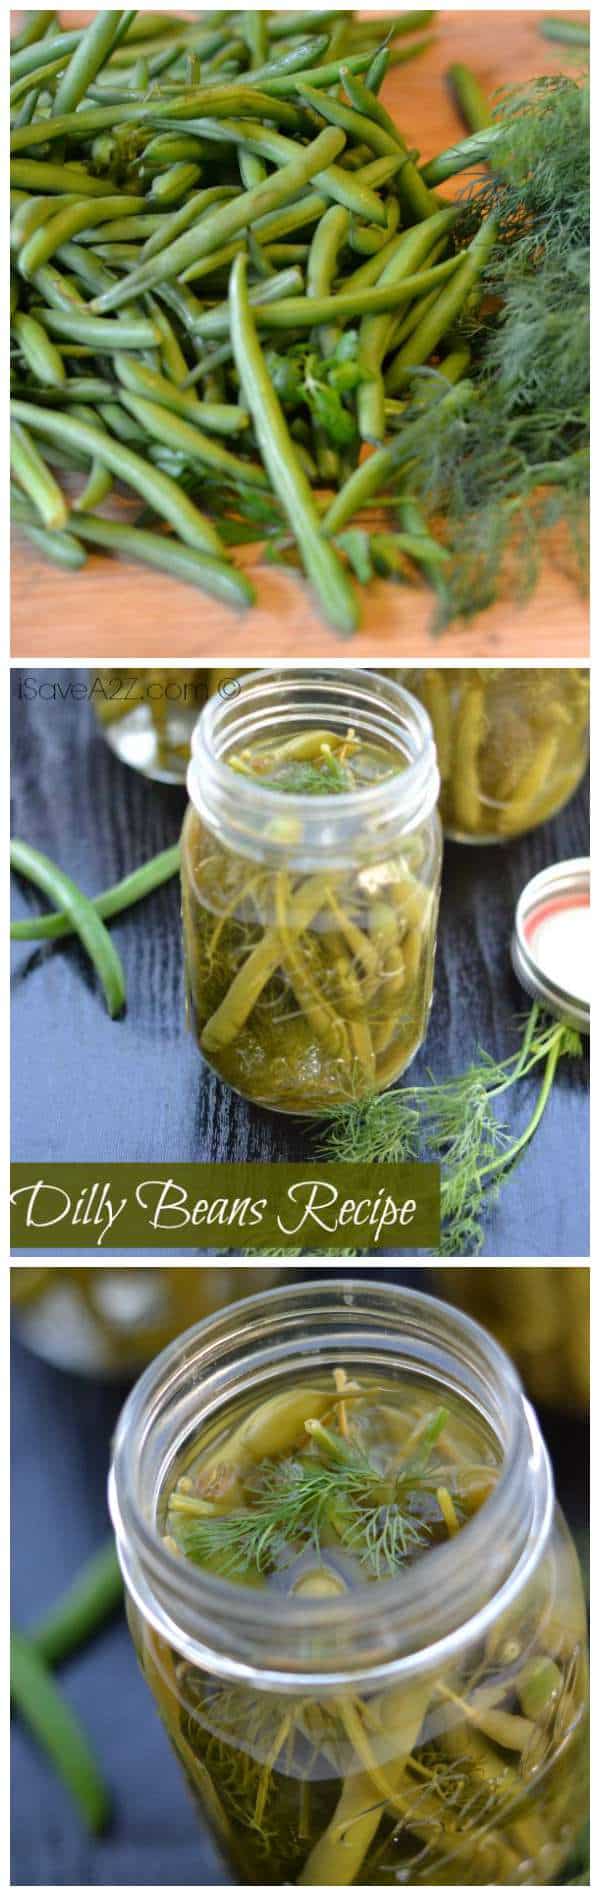 Dilly Beans Recipe